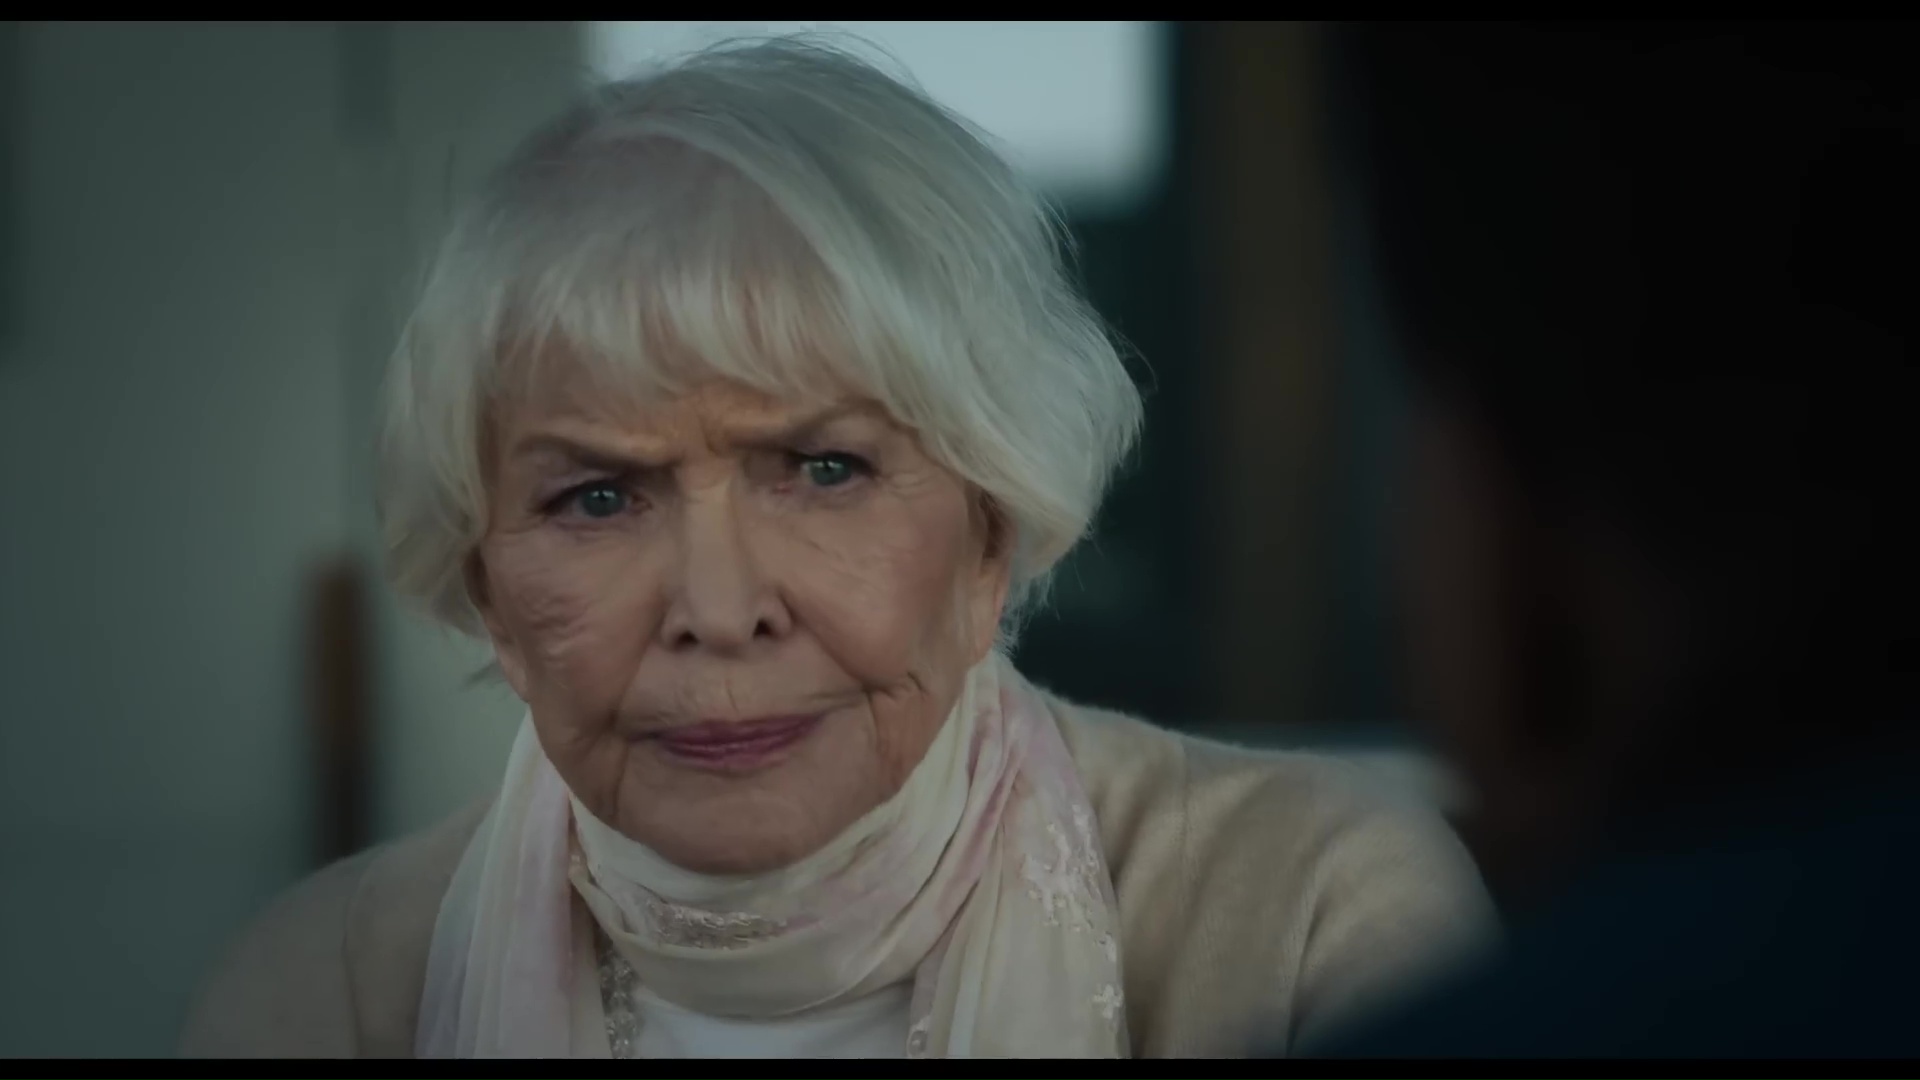 Ellen Burstyn in The Exorcist: Believer wearing a white sweater and looking at someone across a table